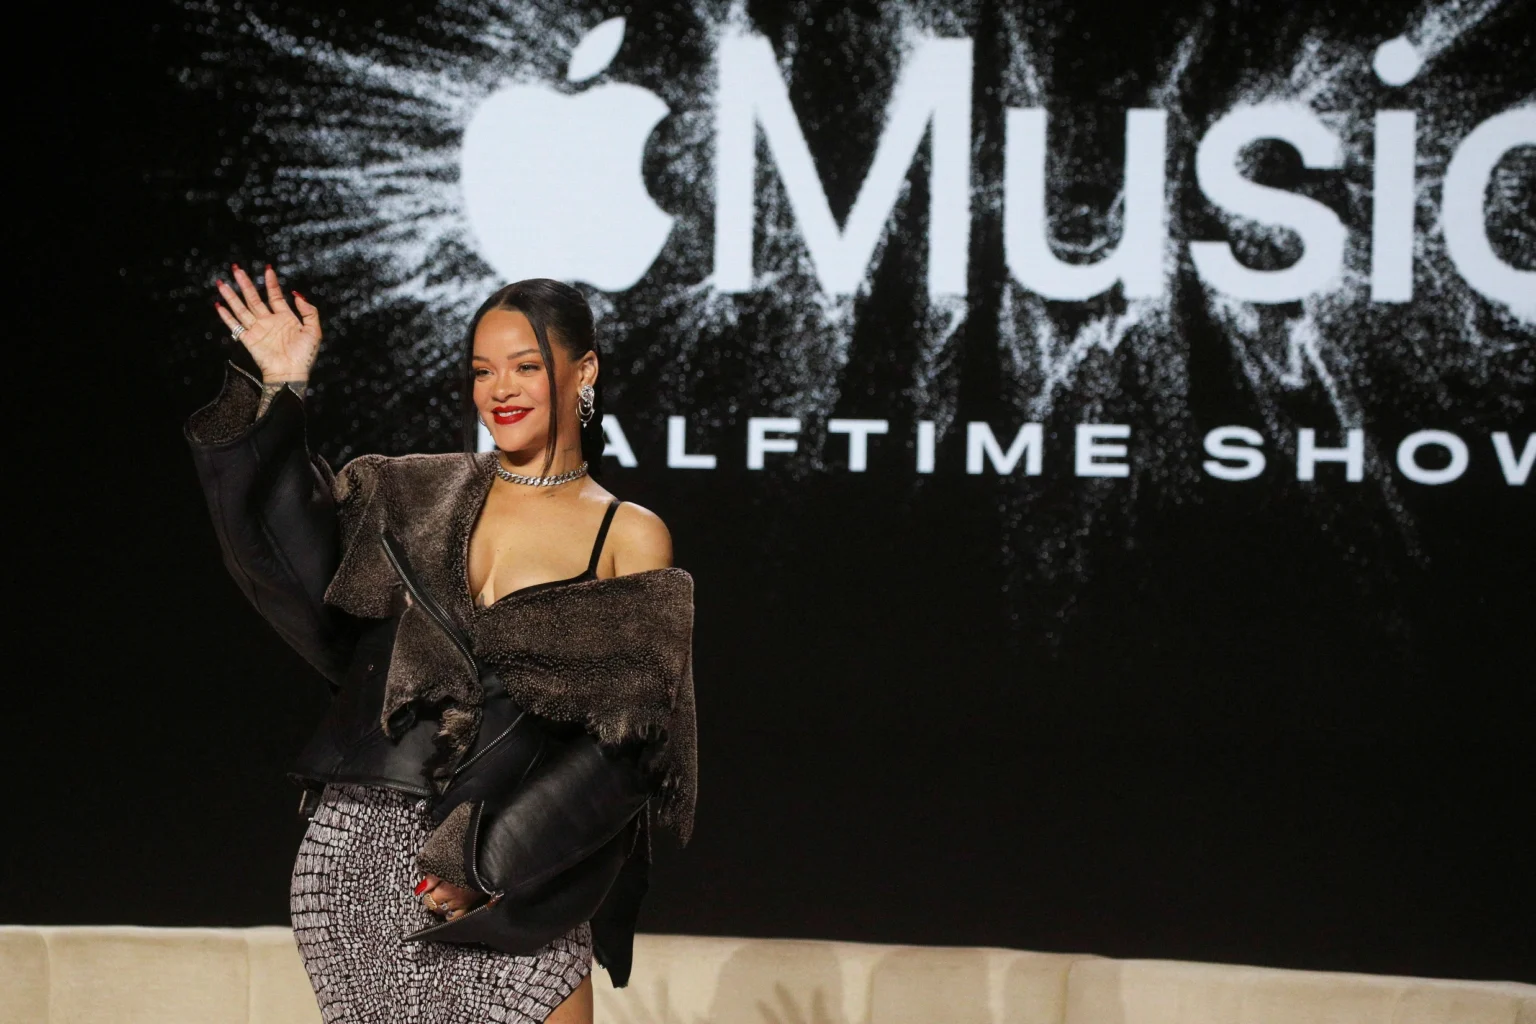 rihanna-seemingly-announced-retirement-news-with-a-bold-message